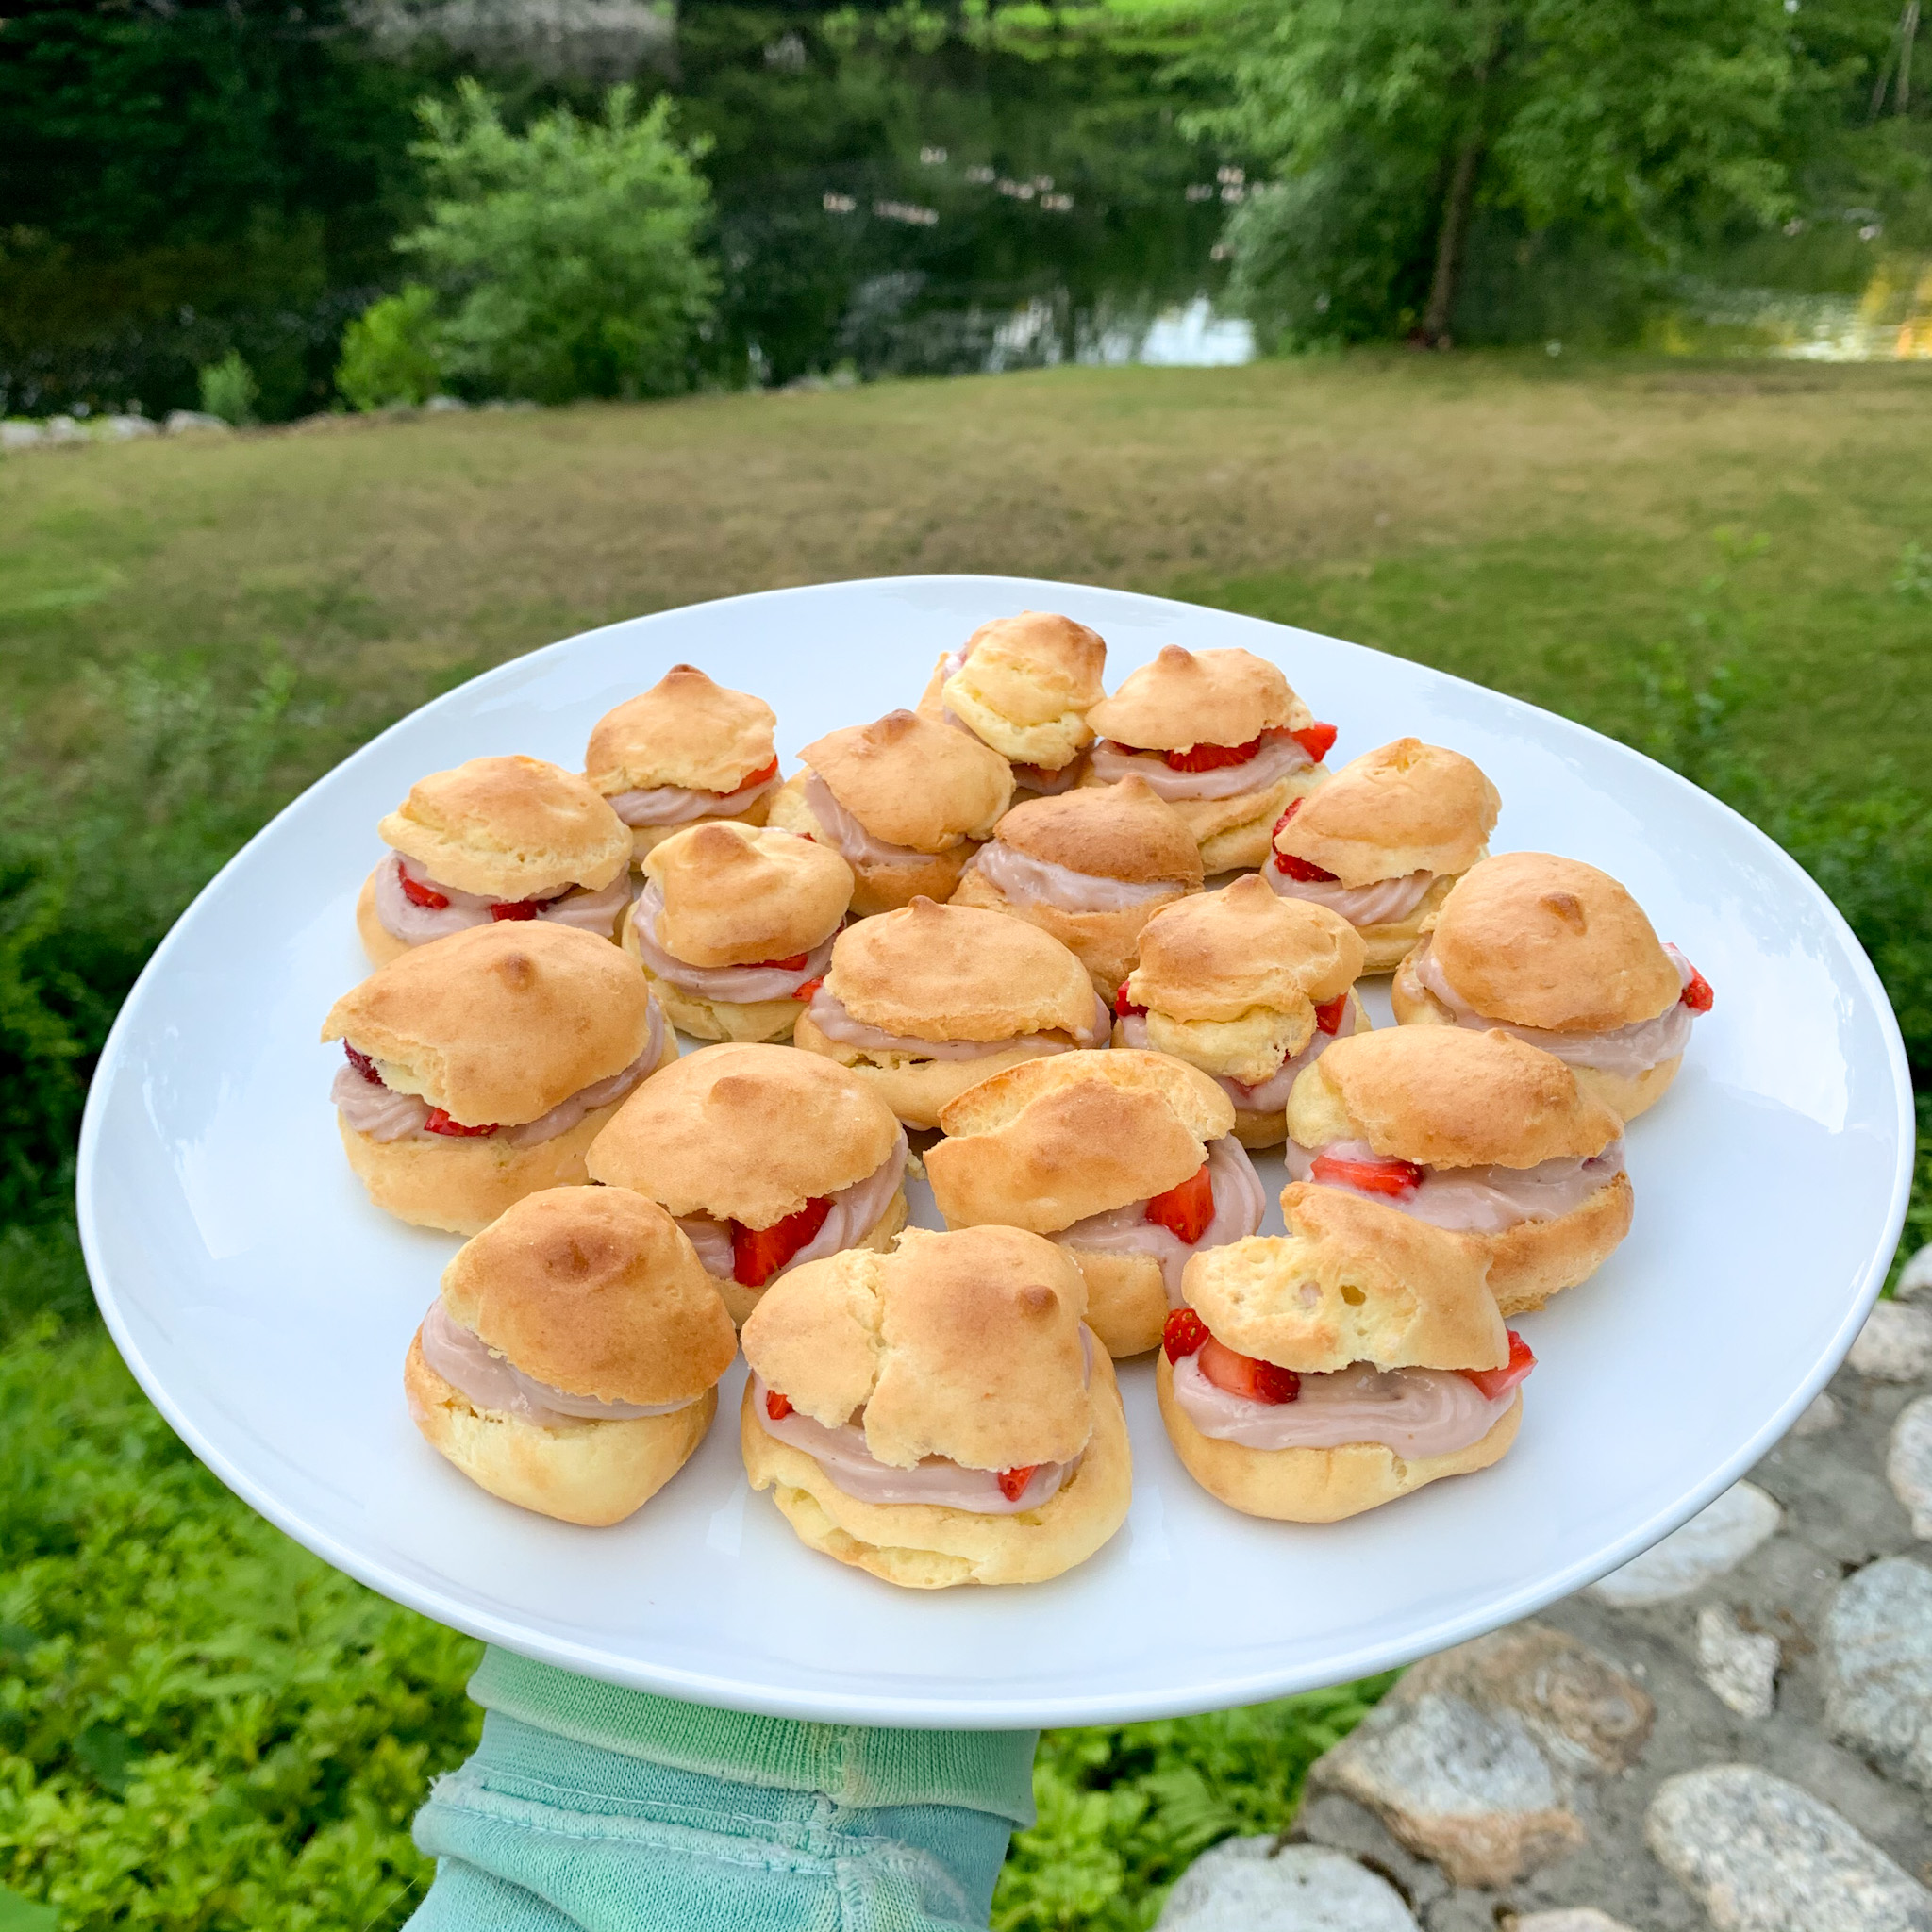 the finished plate of mini gluten free strawberry cream puffs